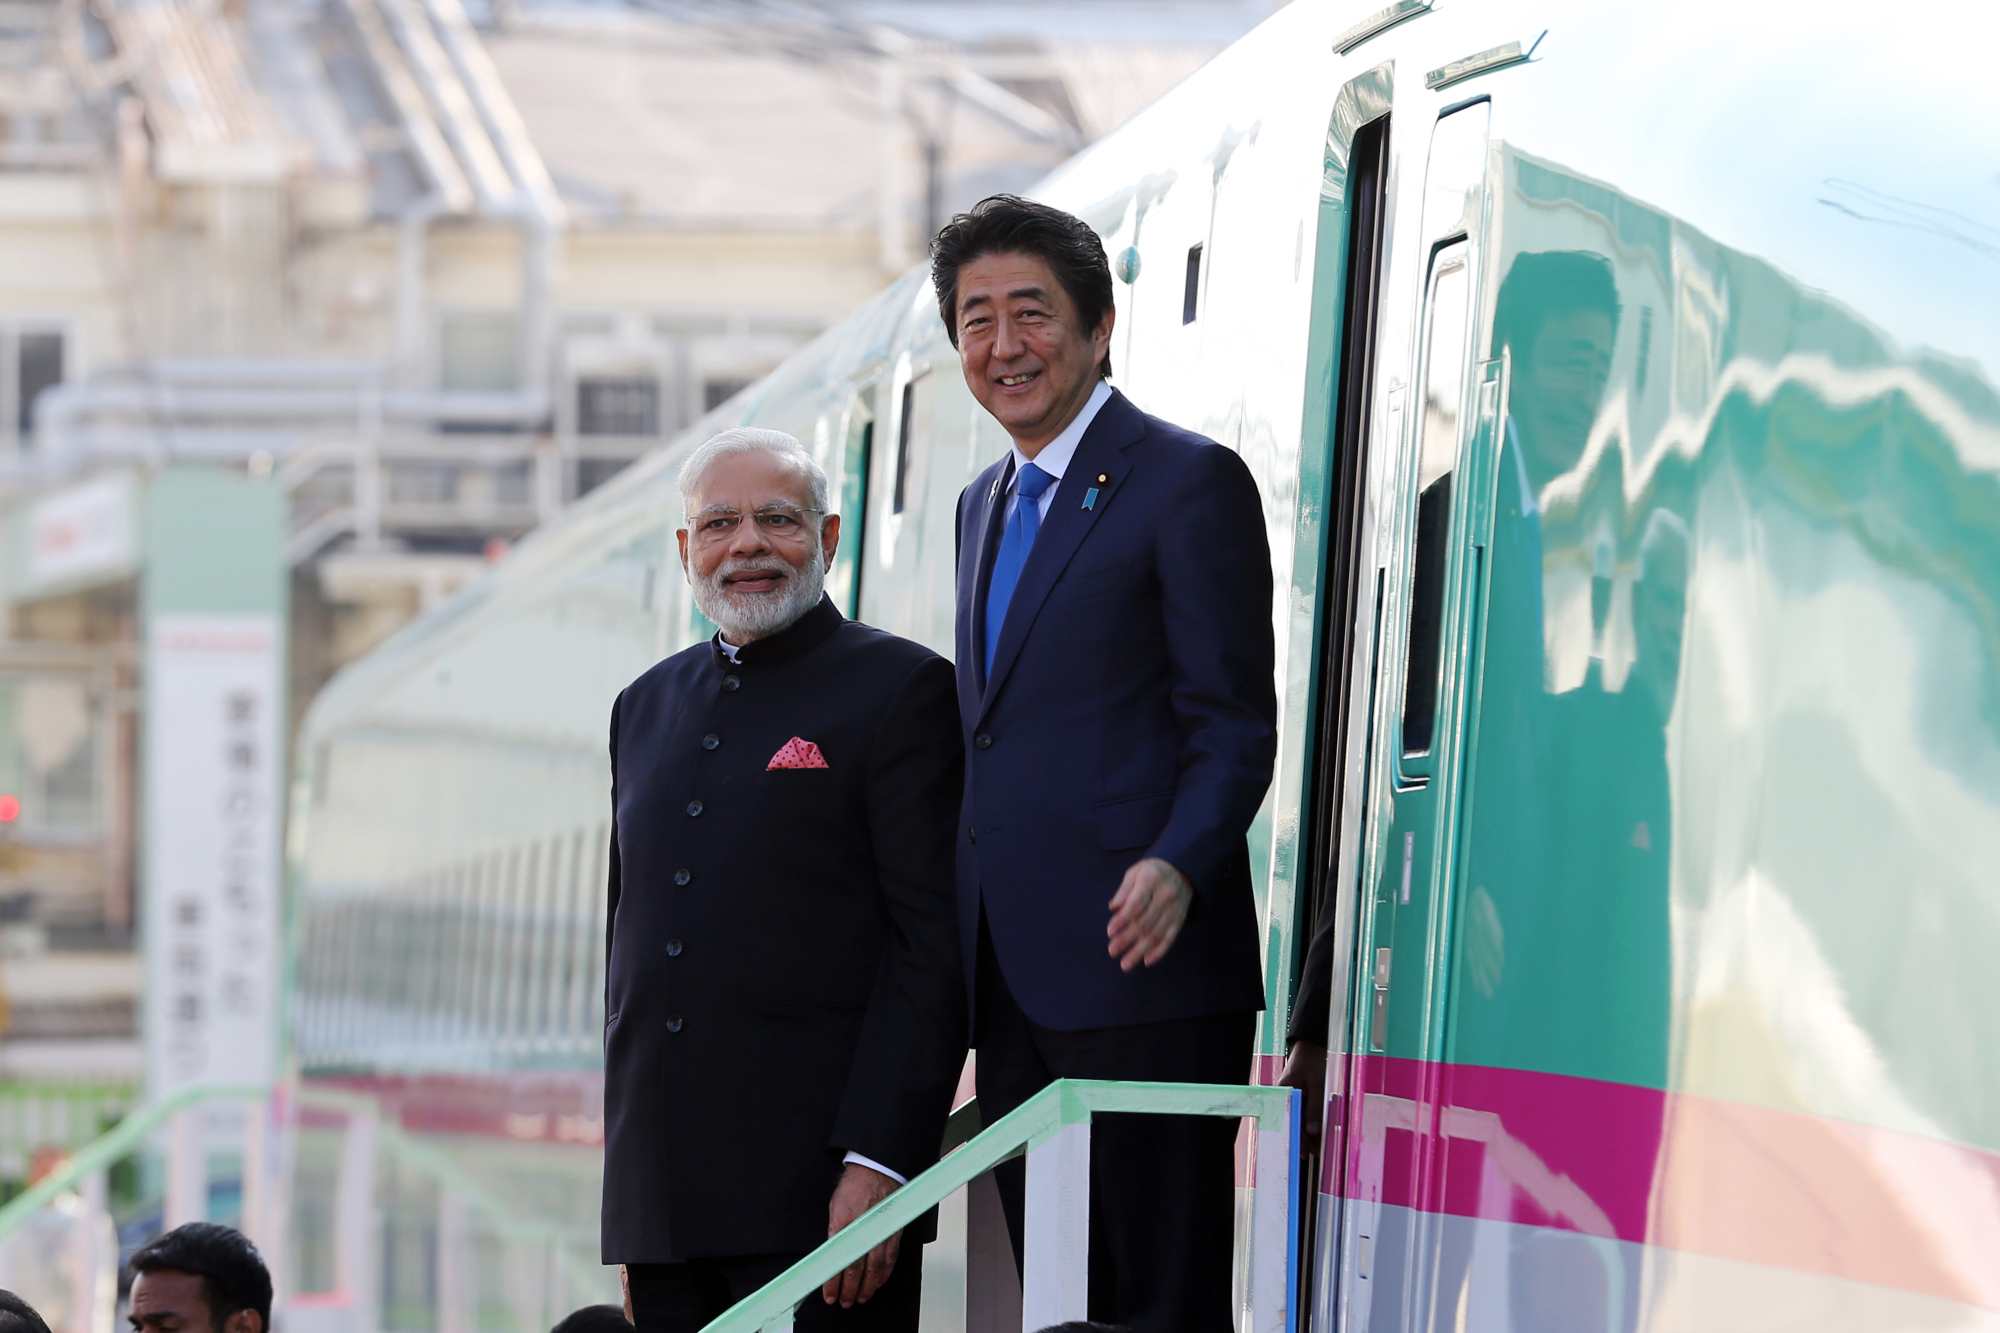 Modi, Abe launch India's first bullet train project: Fast facts